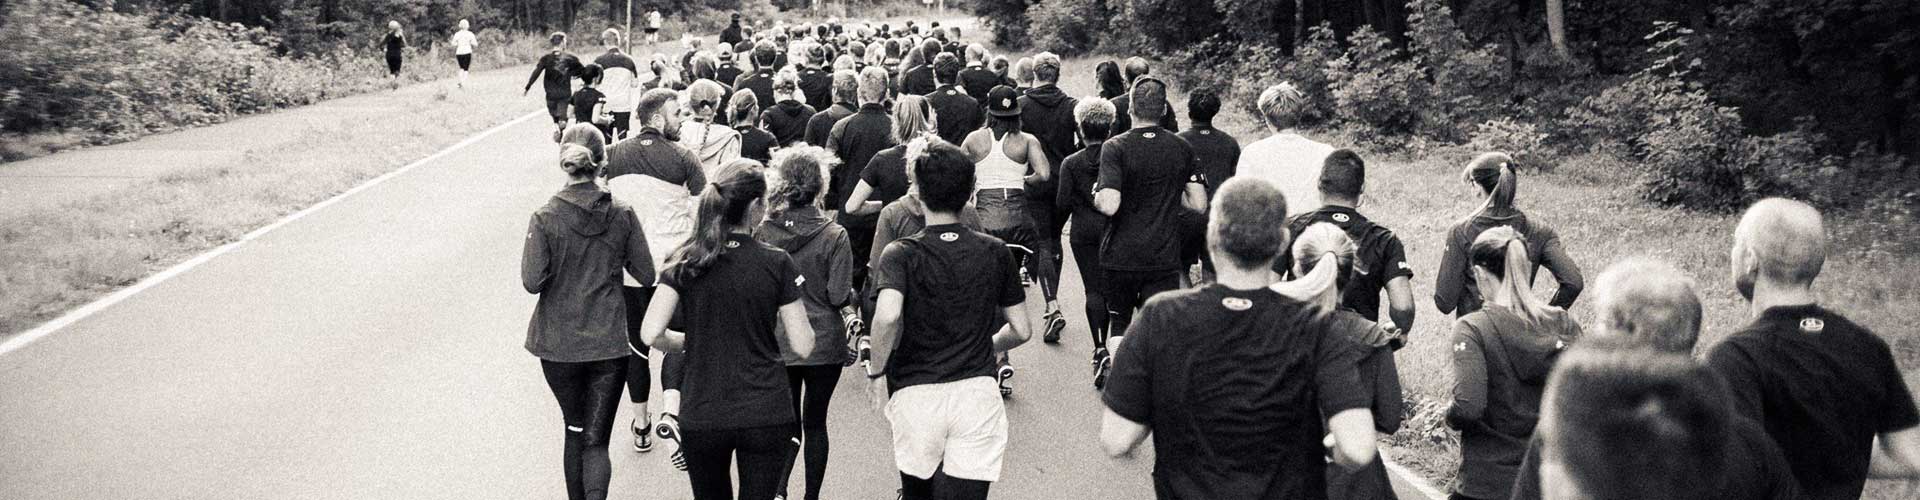 people running in black and white filter